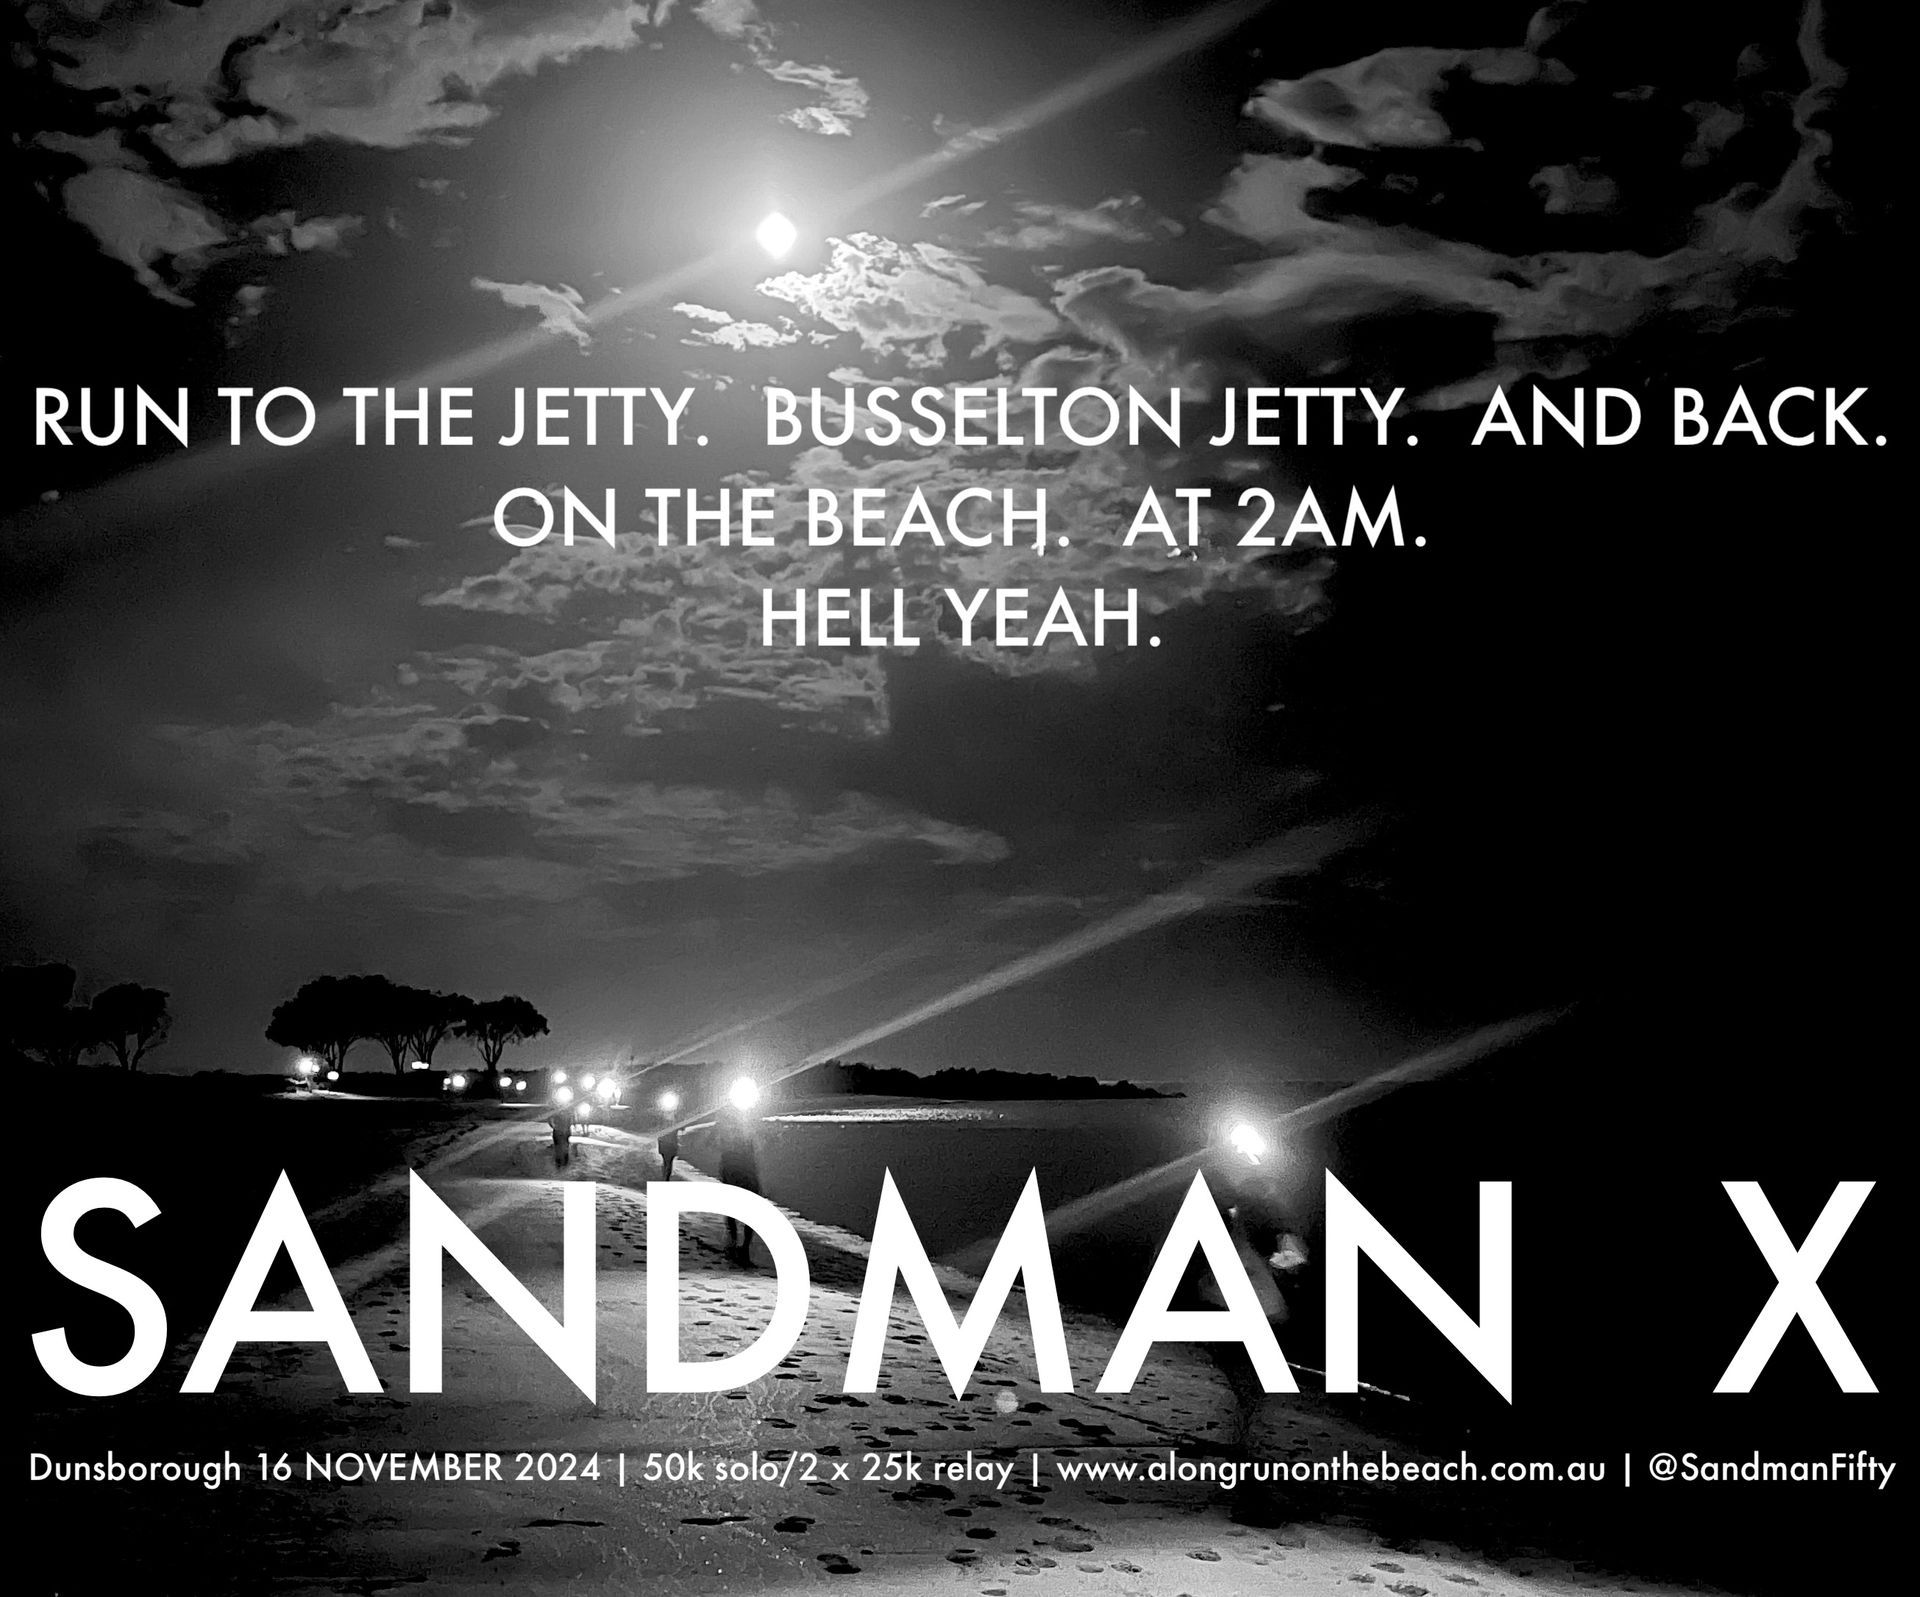 Sandman 50 is a 50km running race from Old Dunsborough boat ramp to Busselton Jetty and back. Start time for the next edition is 2am on Saturday 16 November 2024. This is during the night between sunset on Friday and dawn on Saturday, and the moon will be at an elevation of 26.7 degrees, azimuth 326.5 degrees (33.5 degrees west of due North). In any other circumstances, you've come on the wrong night.